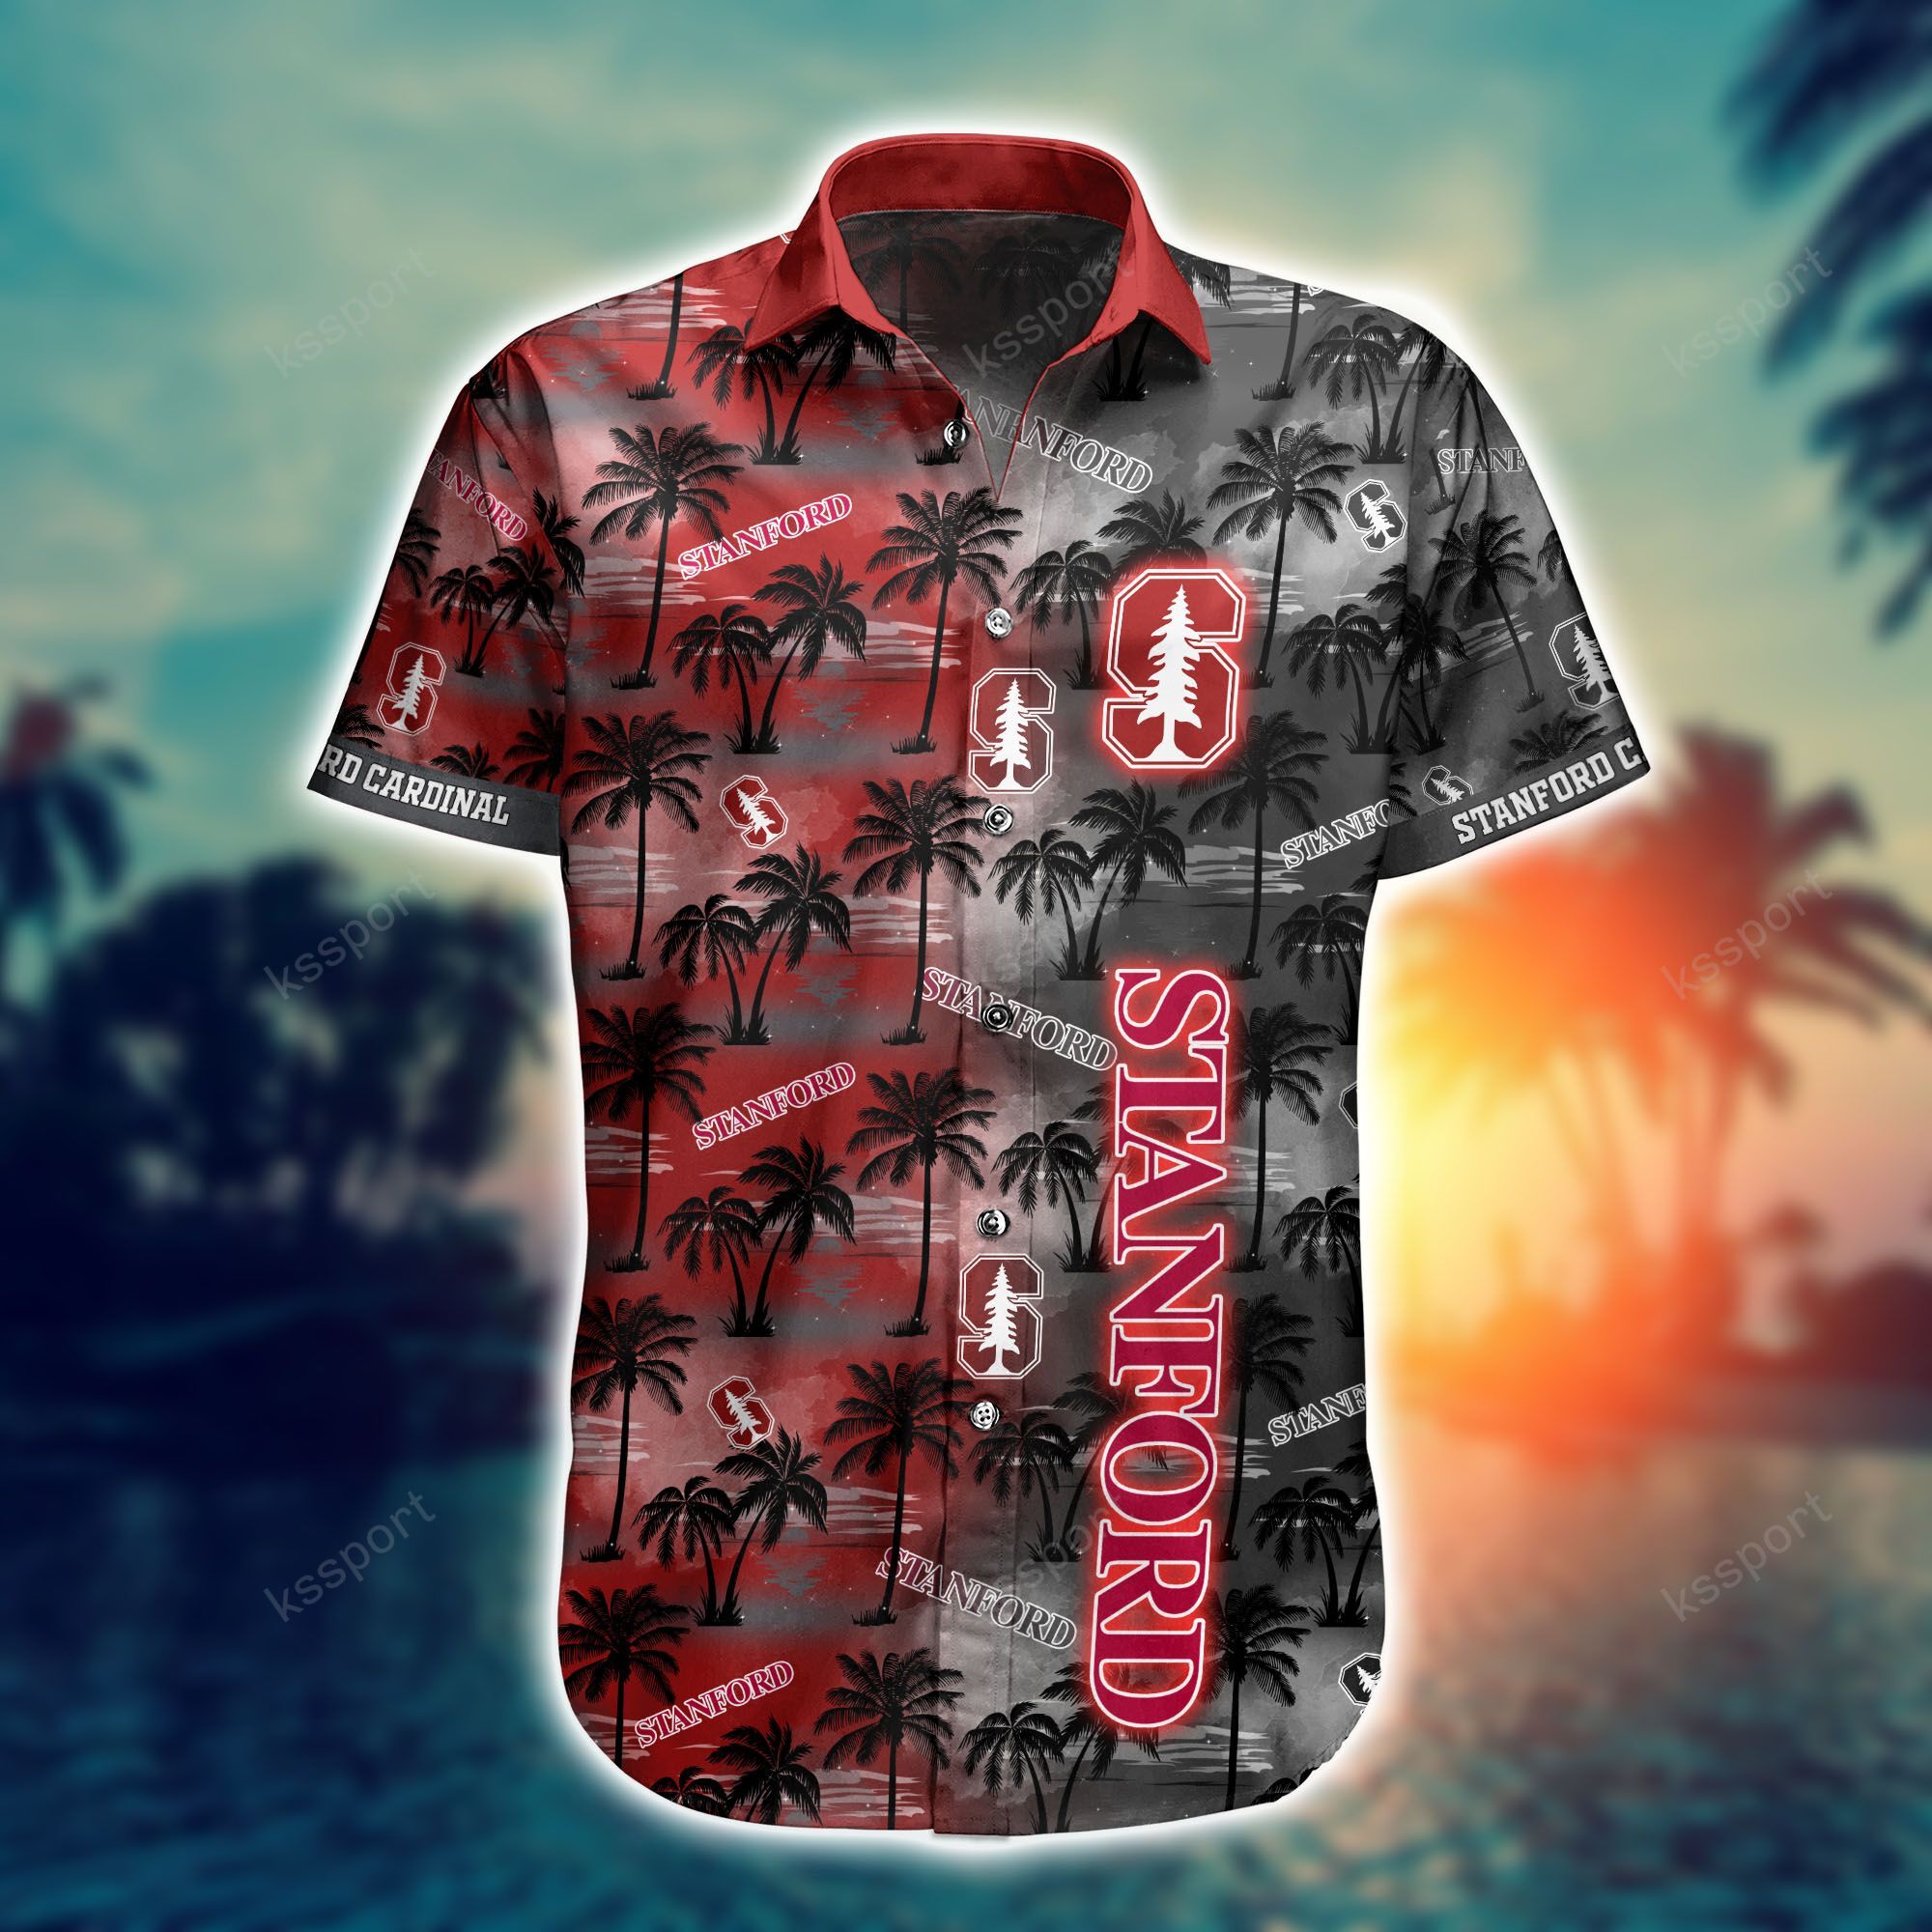 Top cool Hawaiian shirt 2022 - Make sure you get yours today before they run out! 172